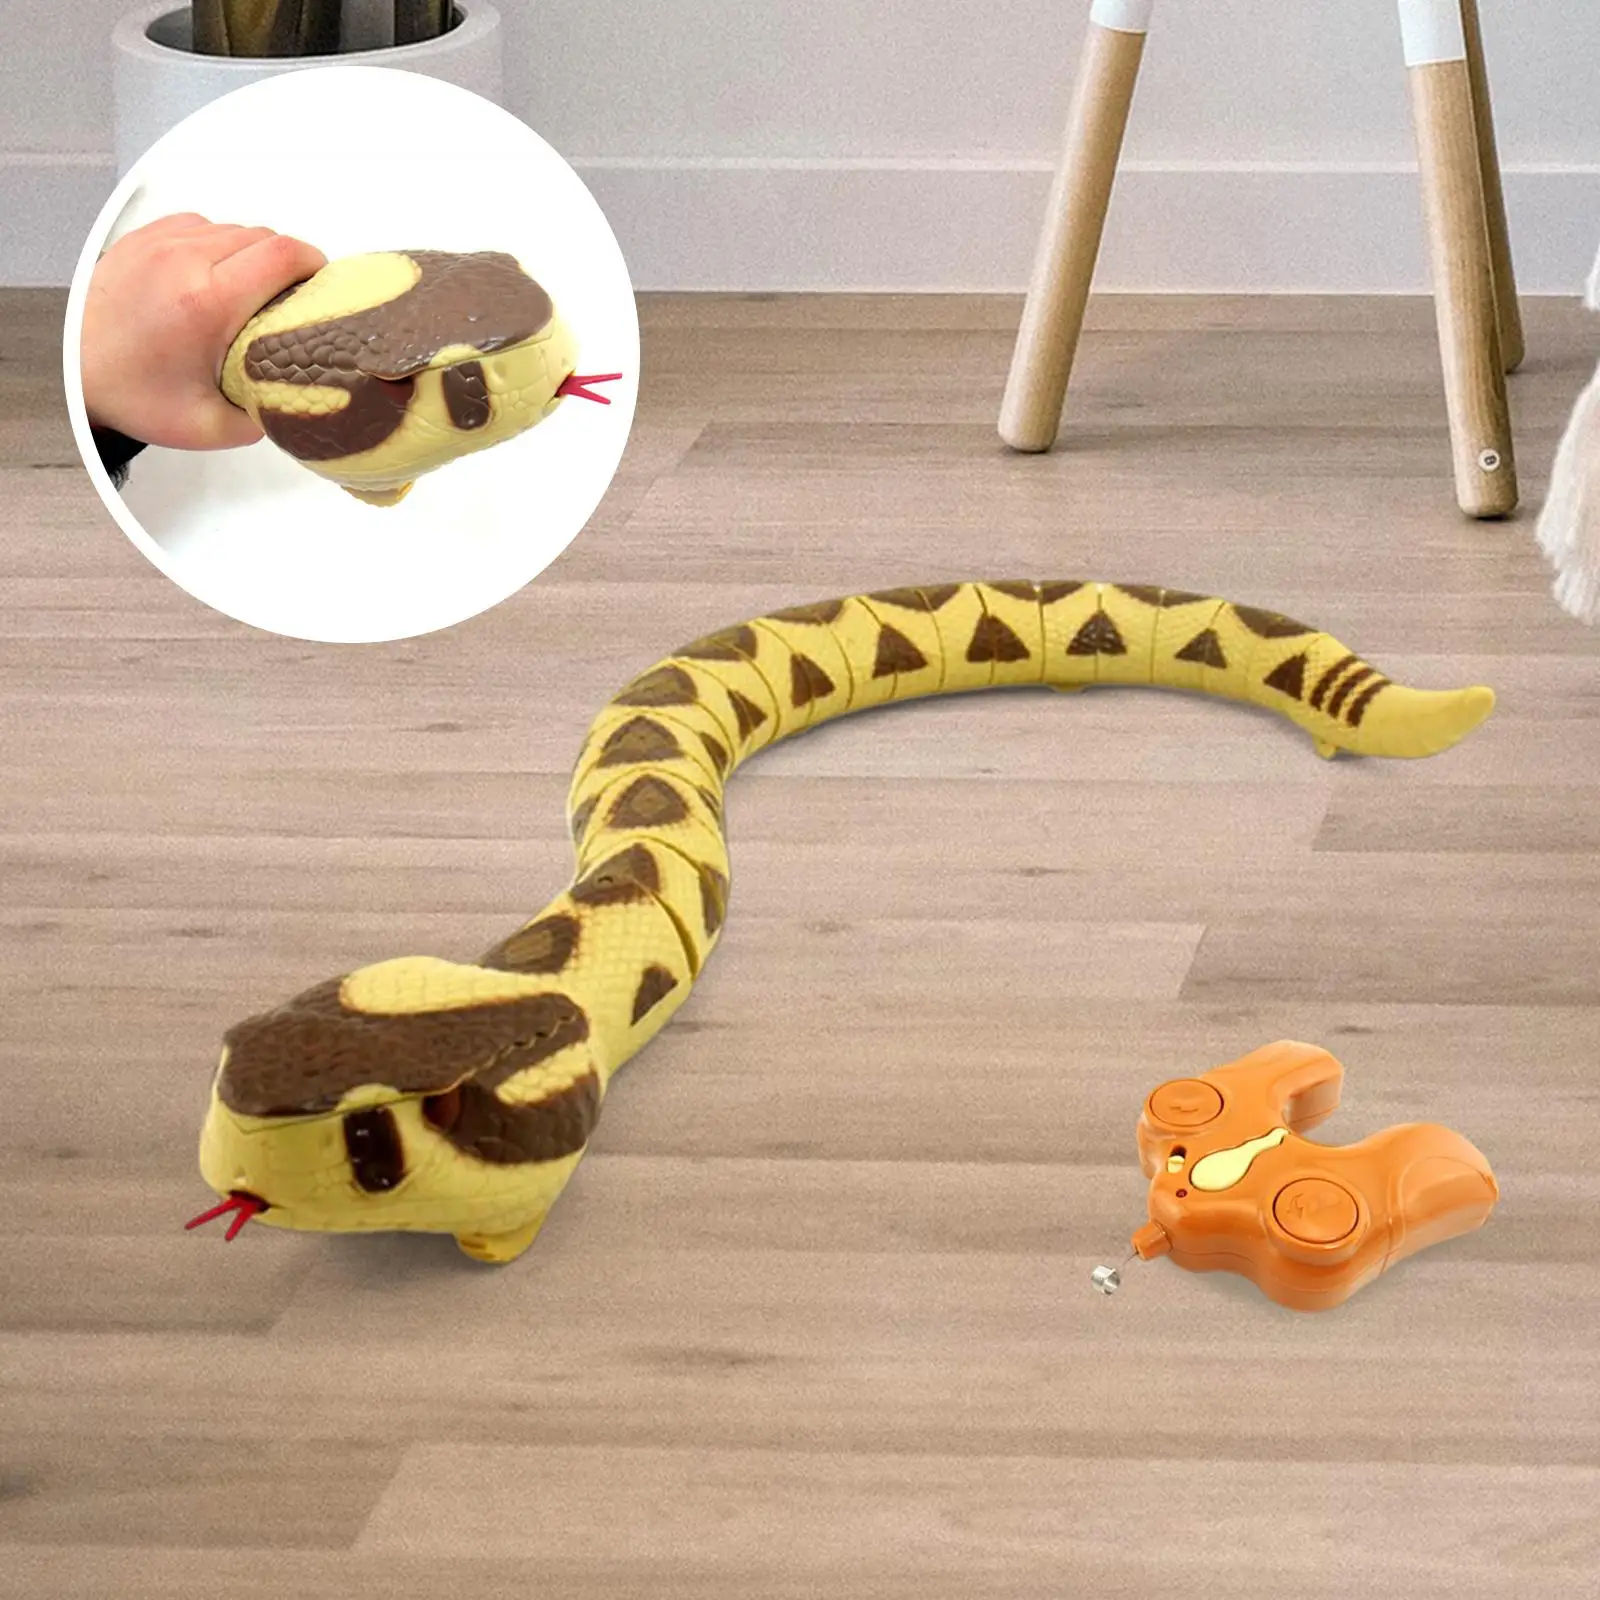 Lifelike RC Snake Toys Scary Snake Toy Party Favors for Party Holiday Gifts